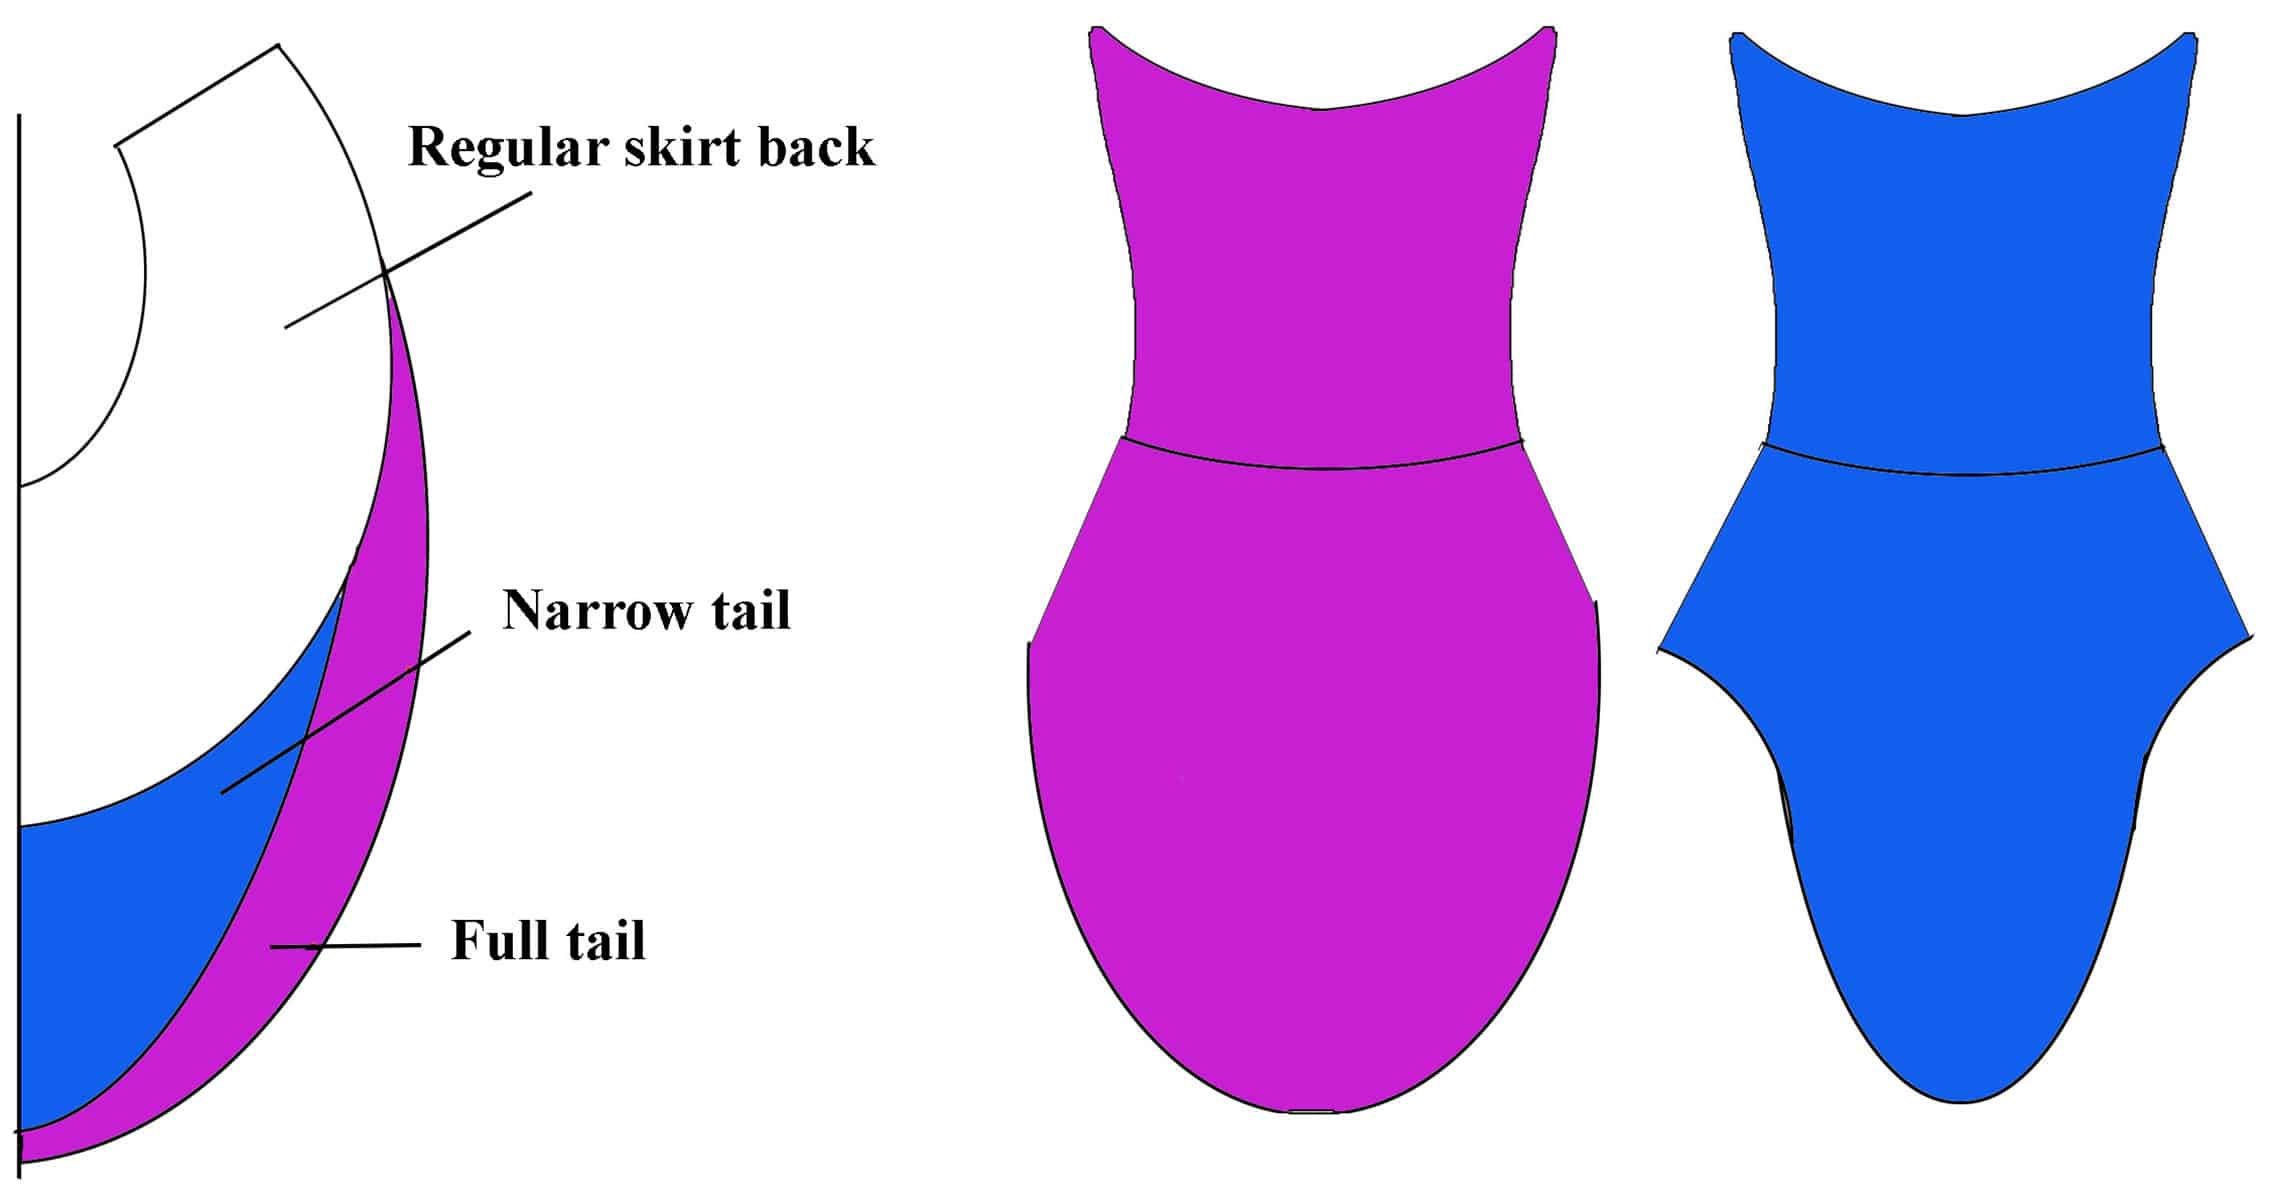 Diagrams of regular, full, and elongated skating skirt patterns, and pink and blue dresses demonstrating what the patterns would look like.